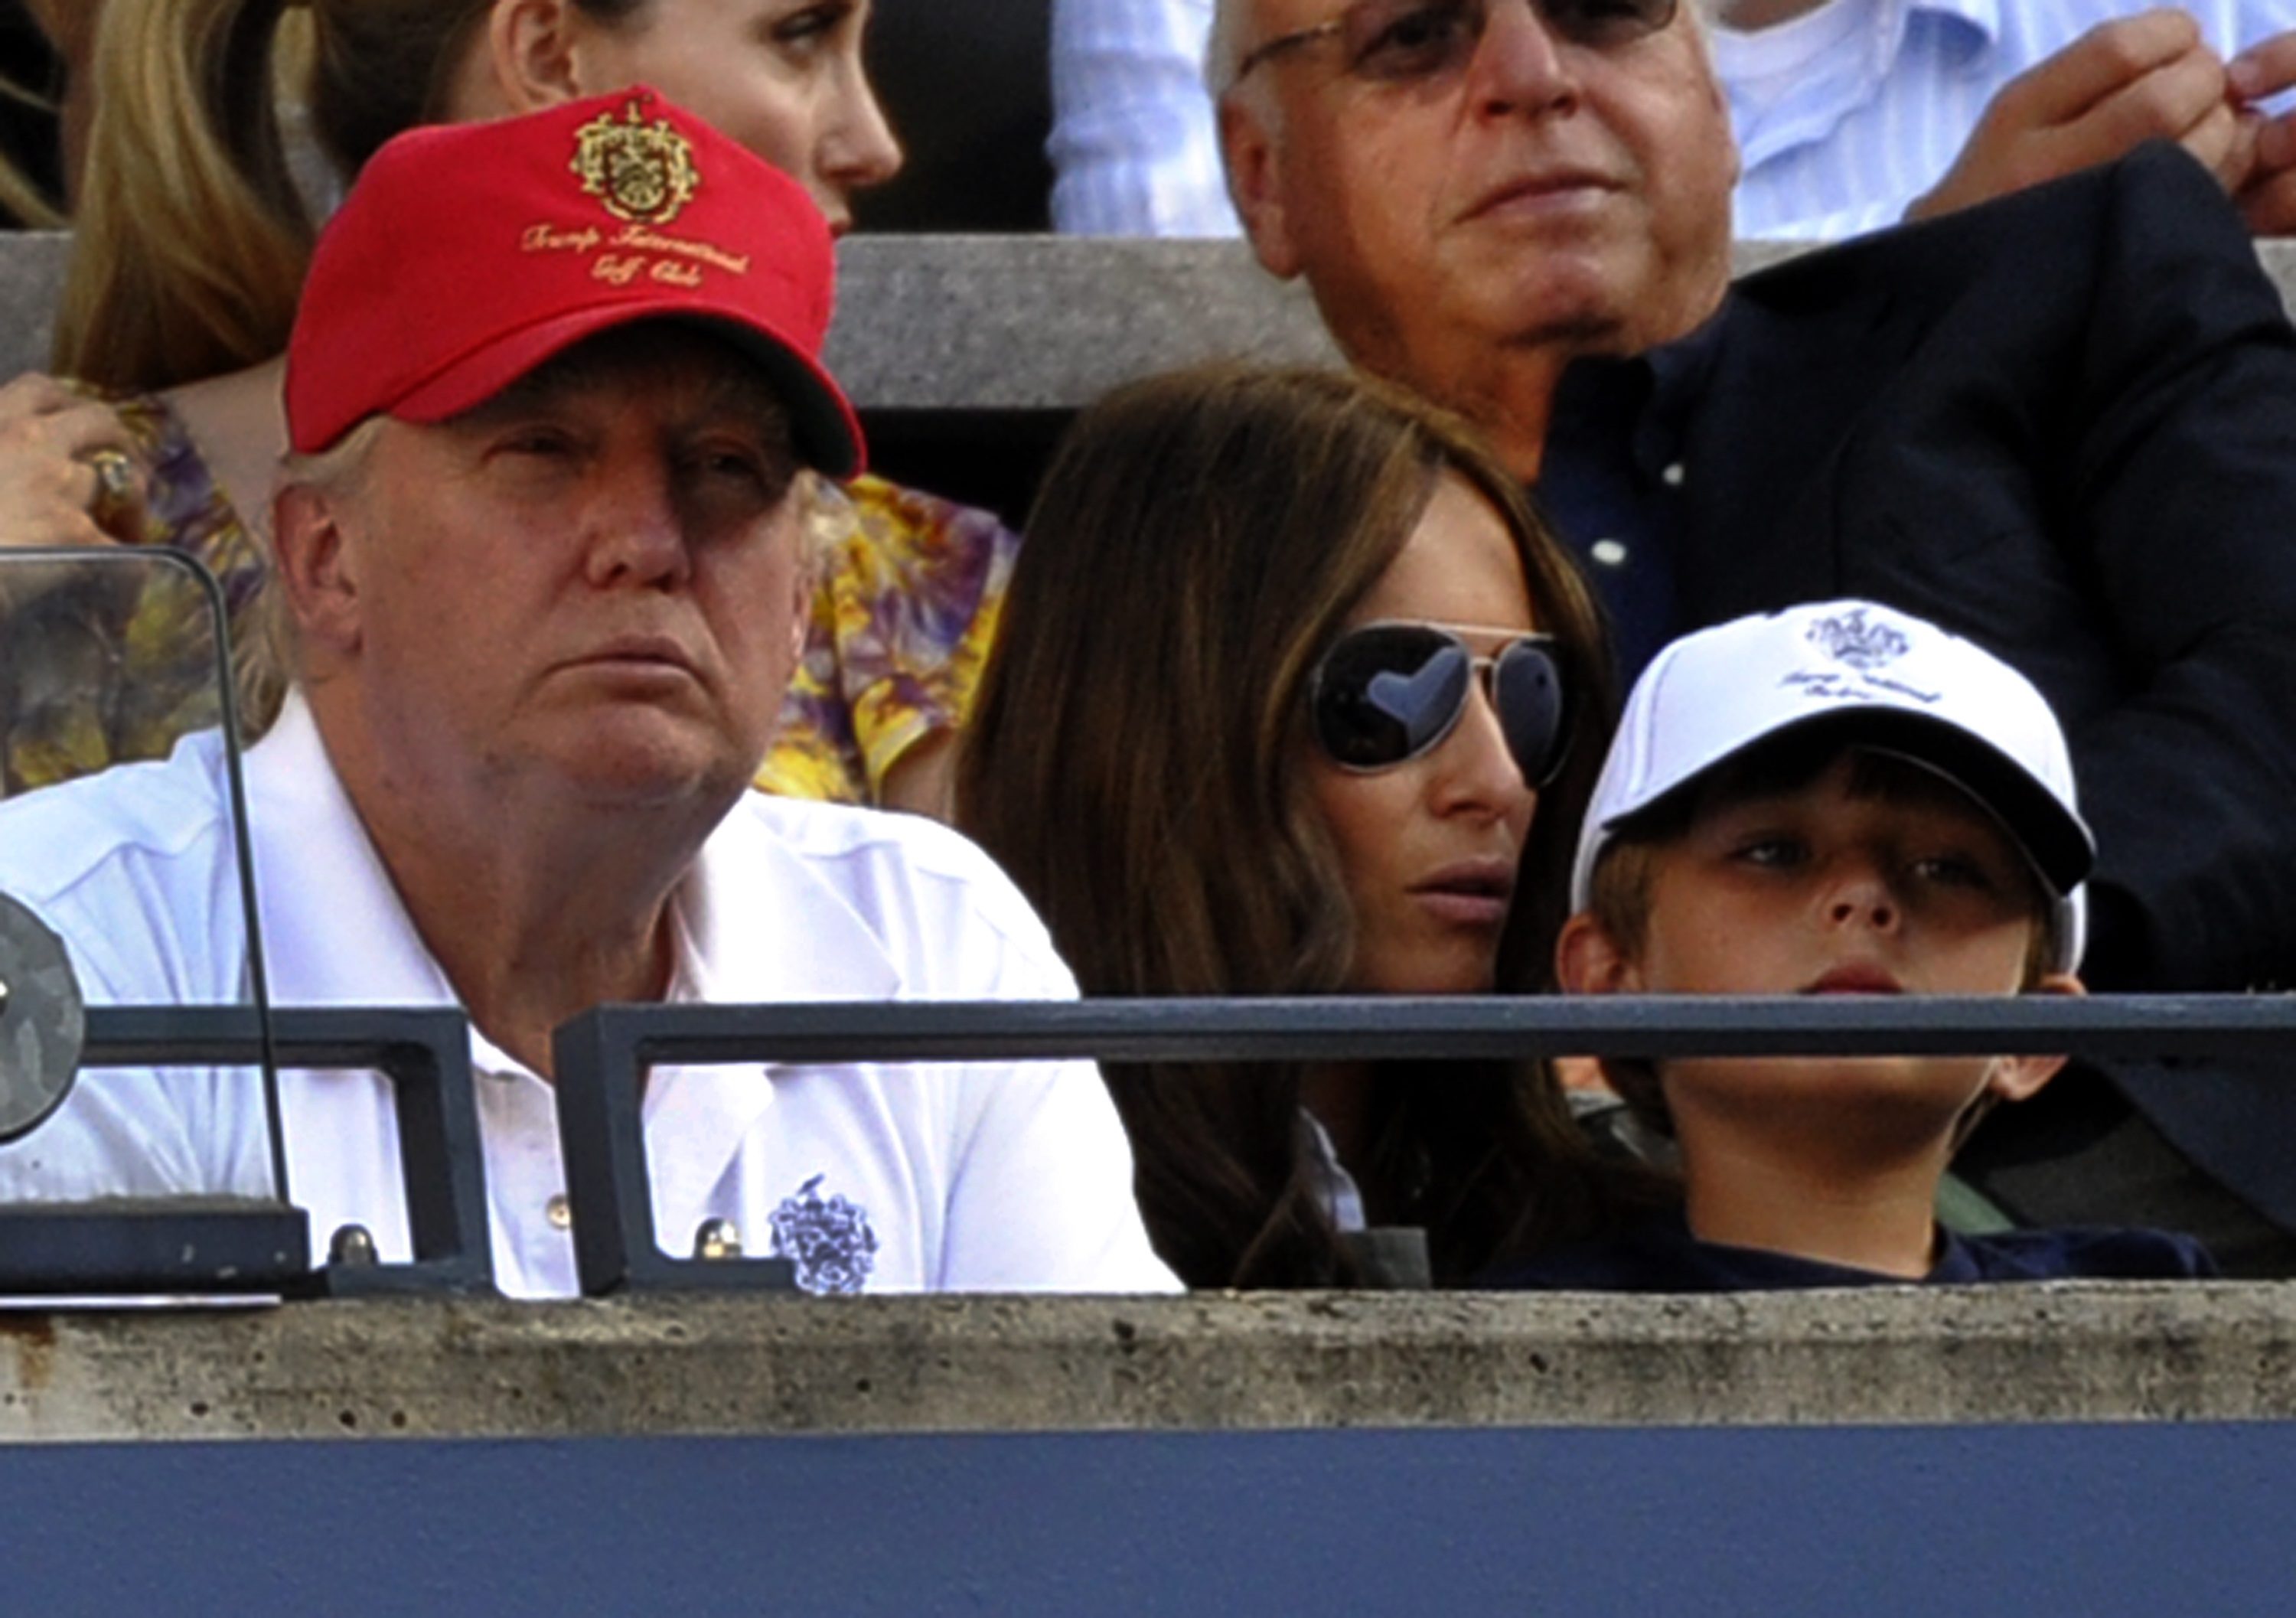 Donald Trump and his wife Melania Knauss-Trump and son Barron William Trump watch Roger Federer of Switzerland play Serbia's Novak Djokovic in the US Open semifinals at the USTA Billie Jean King National Tennis Center in New York on September 11, 2010. AFP PHOTO / TIMOTHY A. CLARY / AFP PHOTO / TIMOTHY A. CLARY